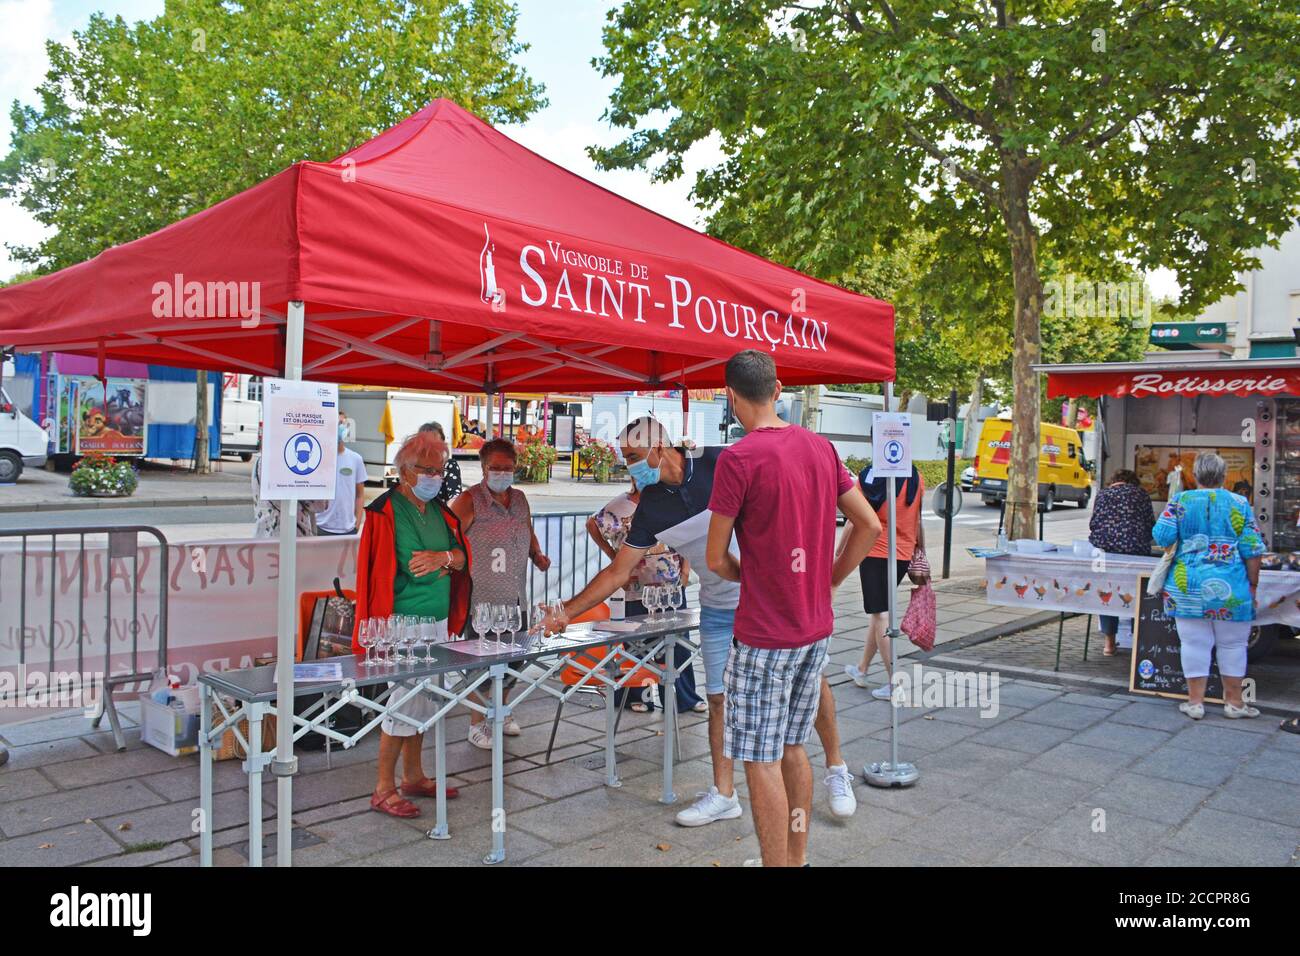 producer of Saint Pourçain wines offering a tasting of his products on the market of Saint-Pourçain-sur-Sioule, Allier, Auvergne-Rhone-Alpes, France Stock Photo